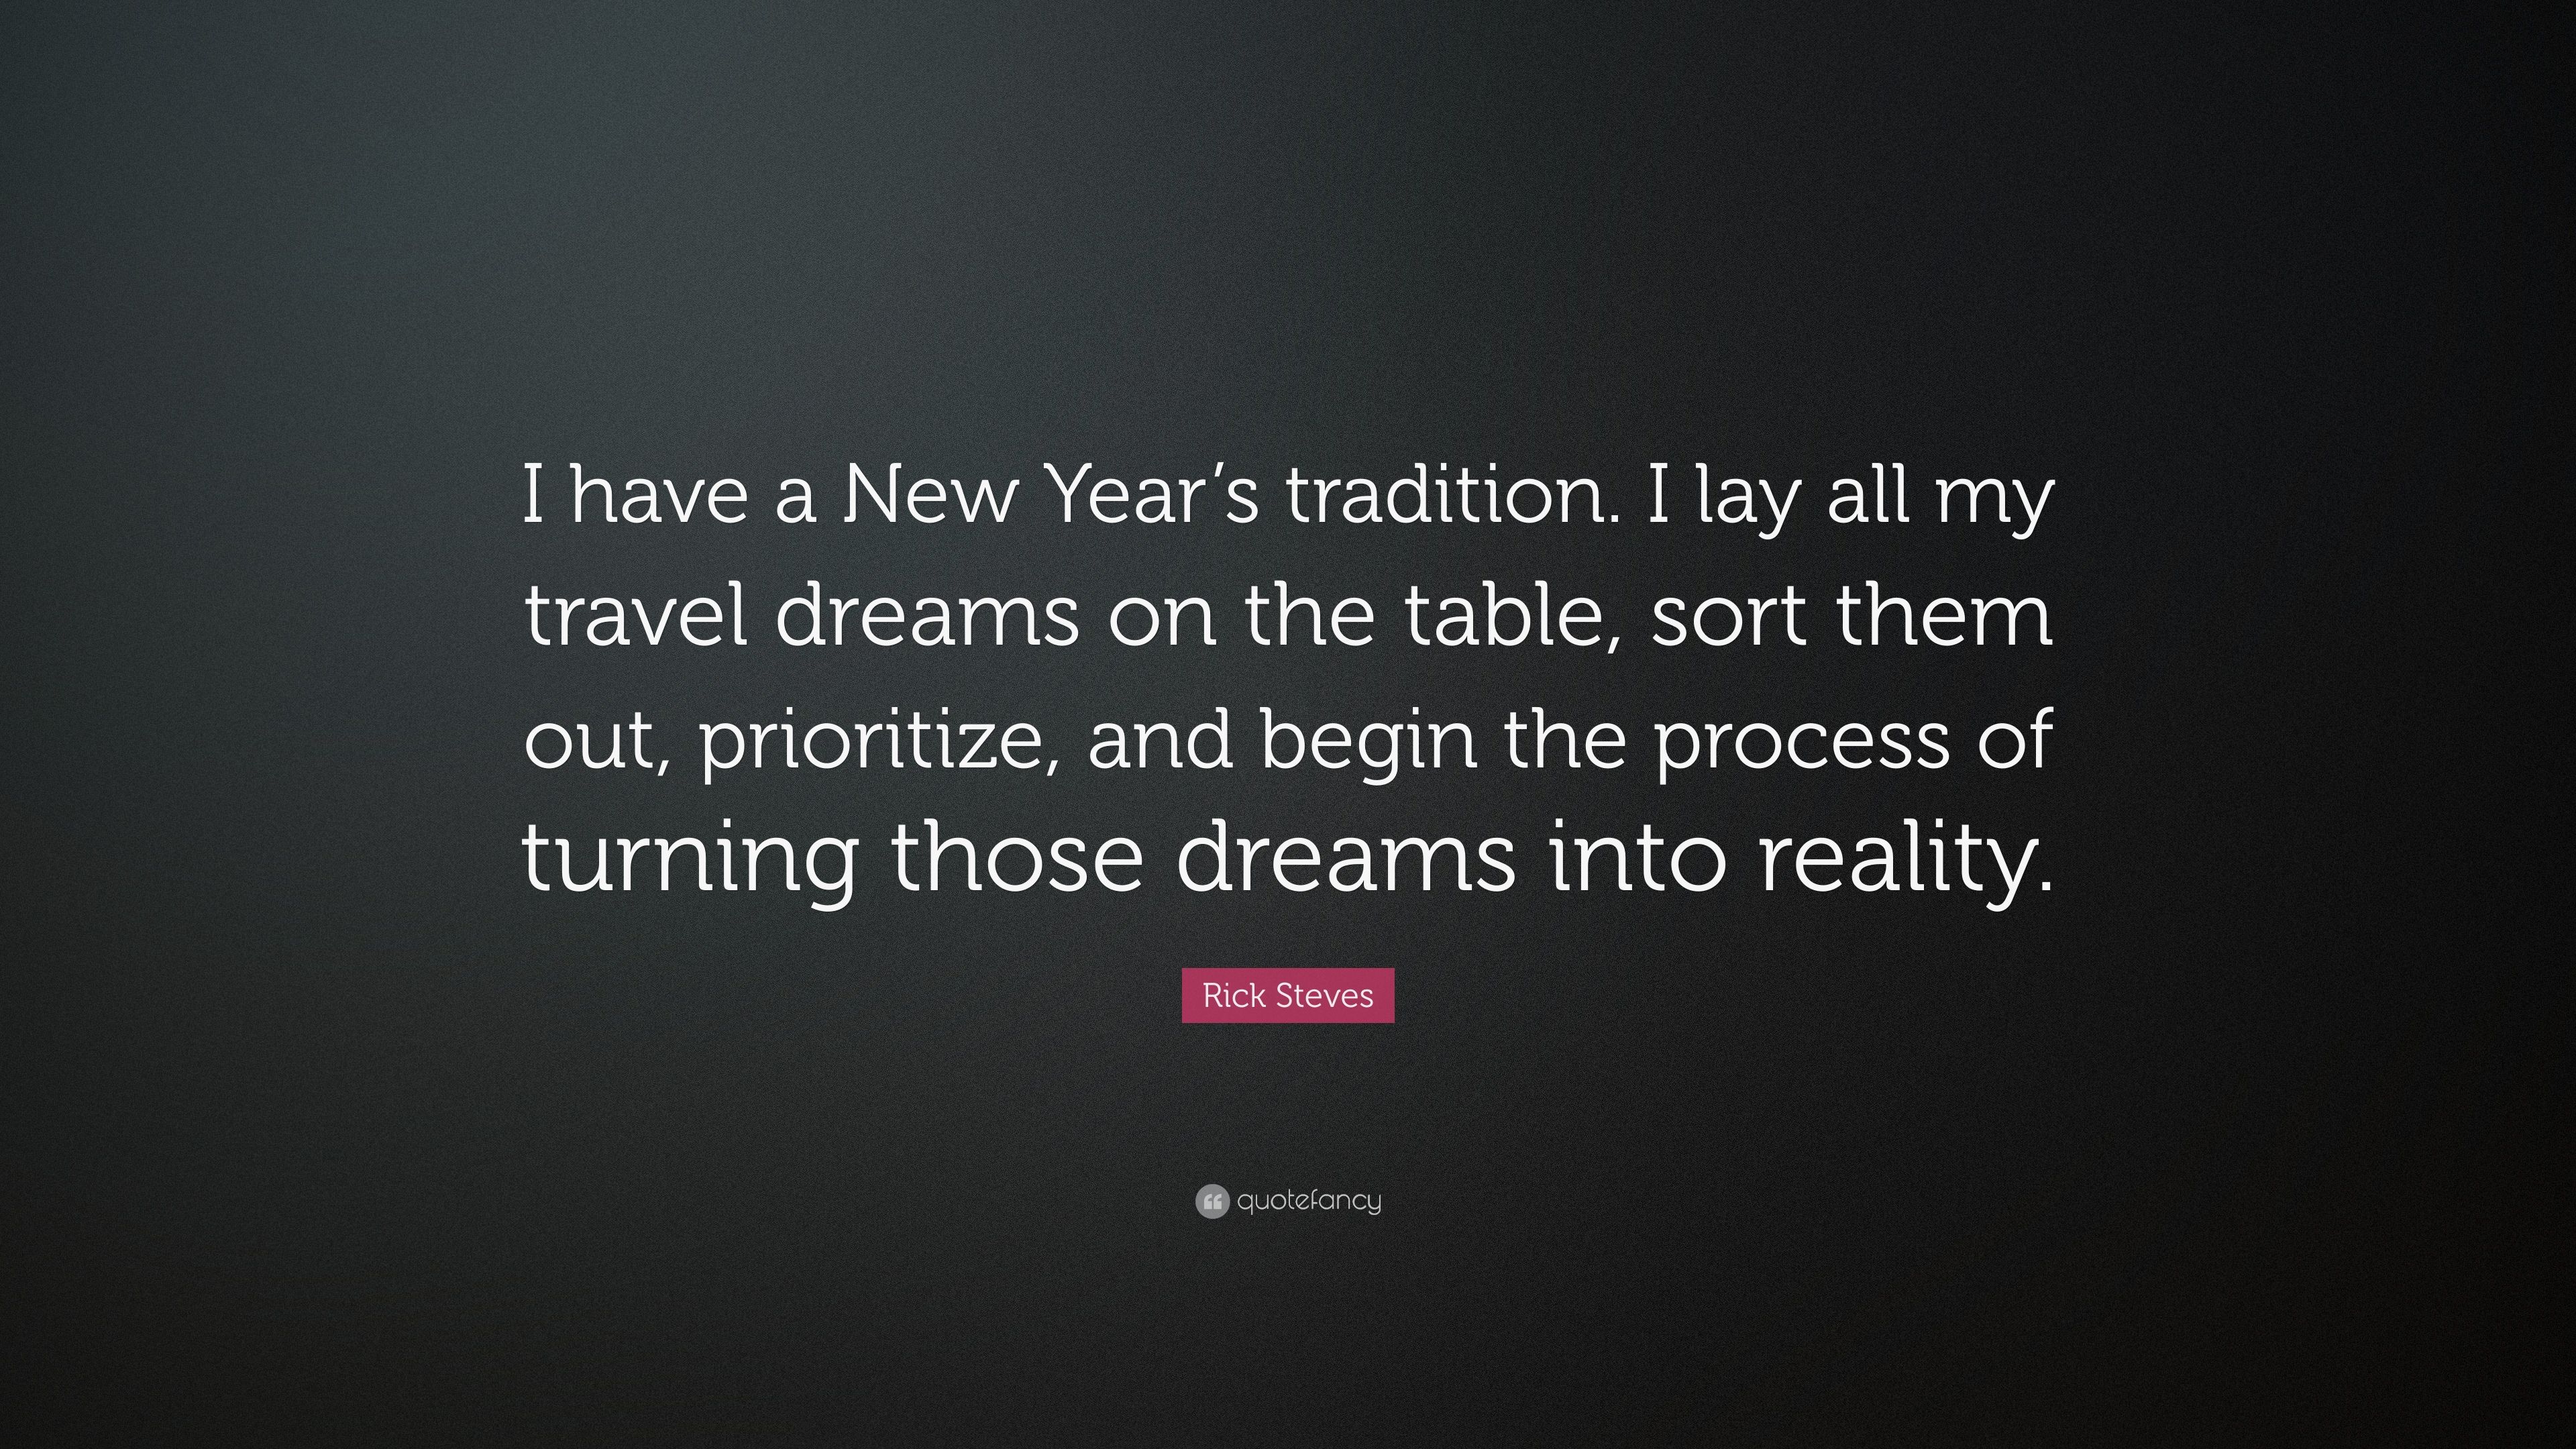 Rick Steves Quote: “I have a New Year's tradition. I lay all my